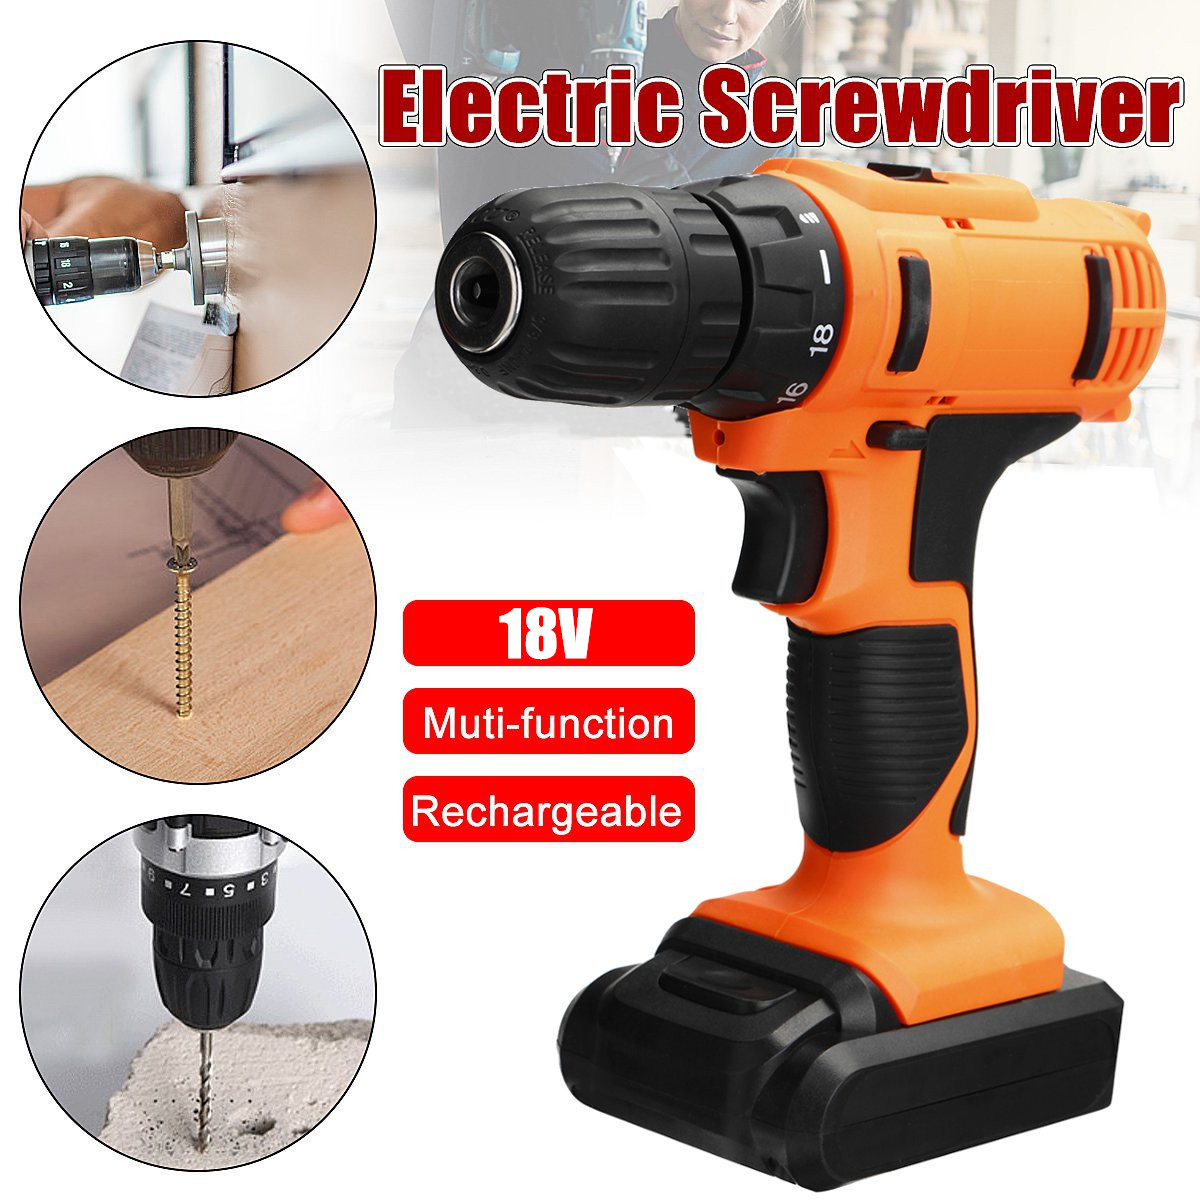 18V-Electric-Screwdriver-Cordless-Hammer-Impact-Power-Drill-Driver-Rechargeable-with-13Pcs-Drill-Bit-1324472-1